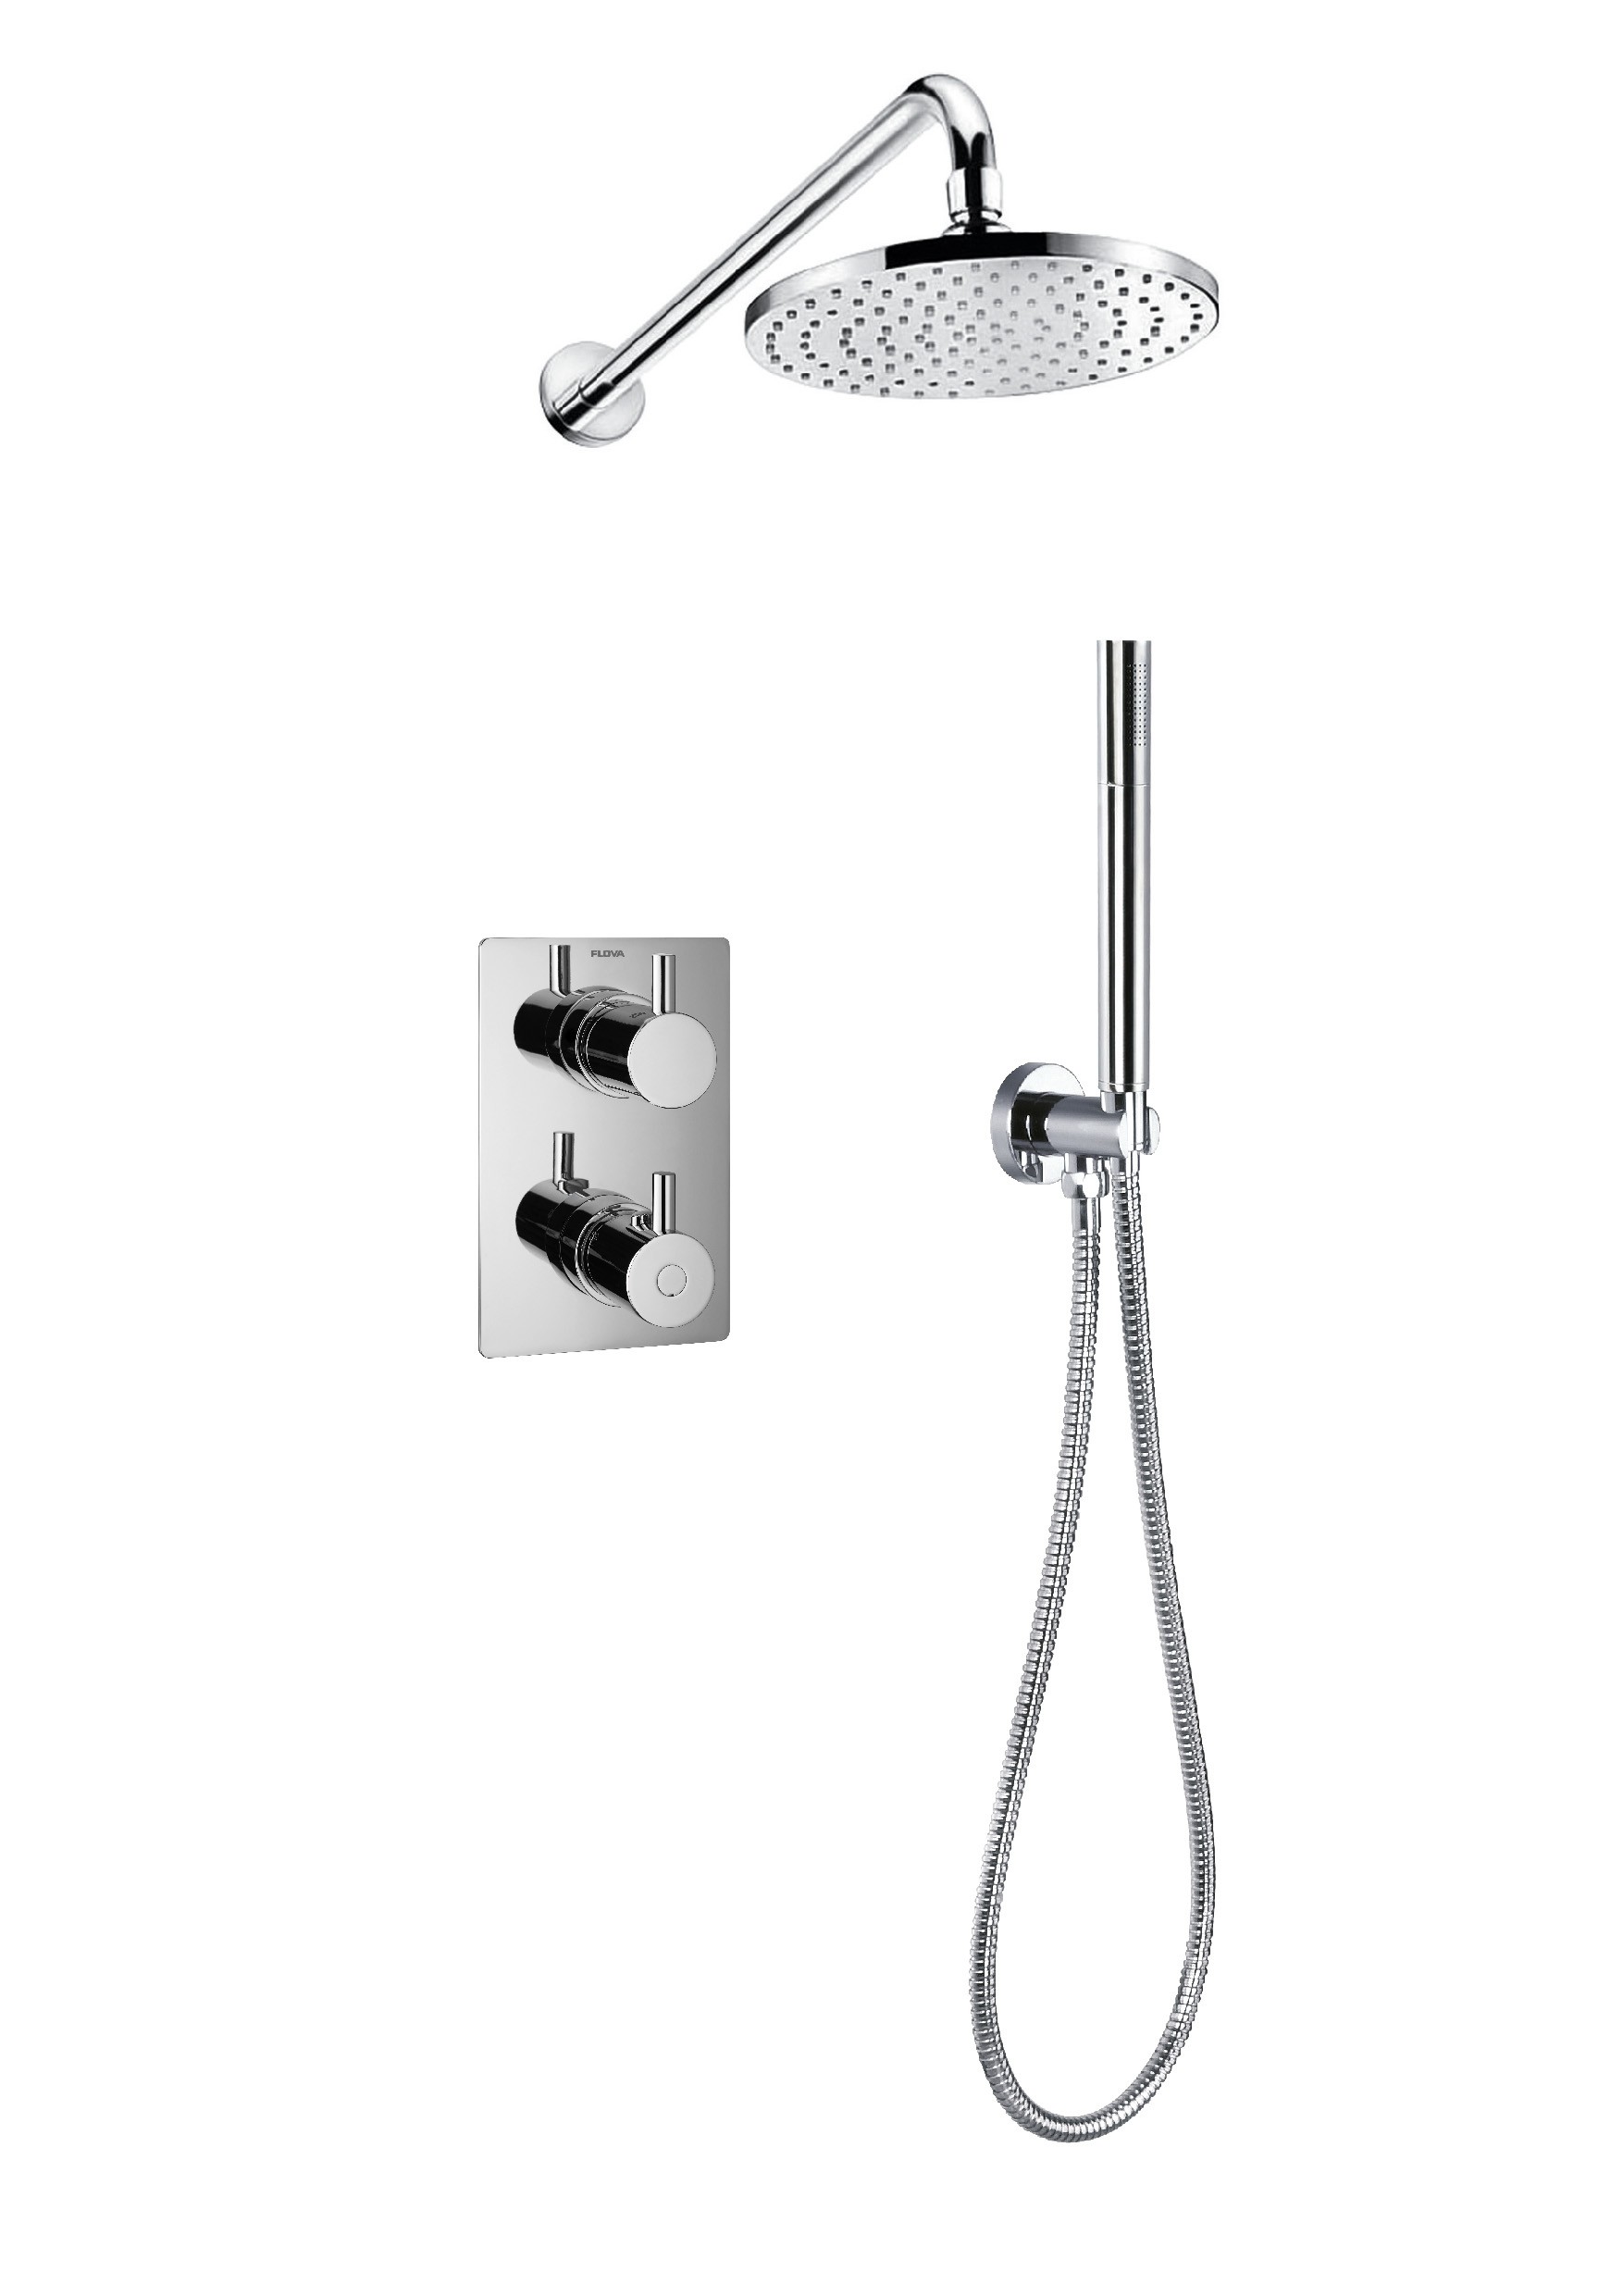 Flova LV2WPK1-SQ-U Levo Square 2-Outlet Thermostatic Shower Valve with Fixed Head and Handshower Kit Chrome